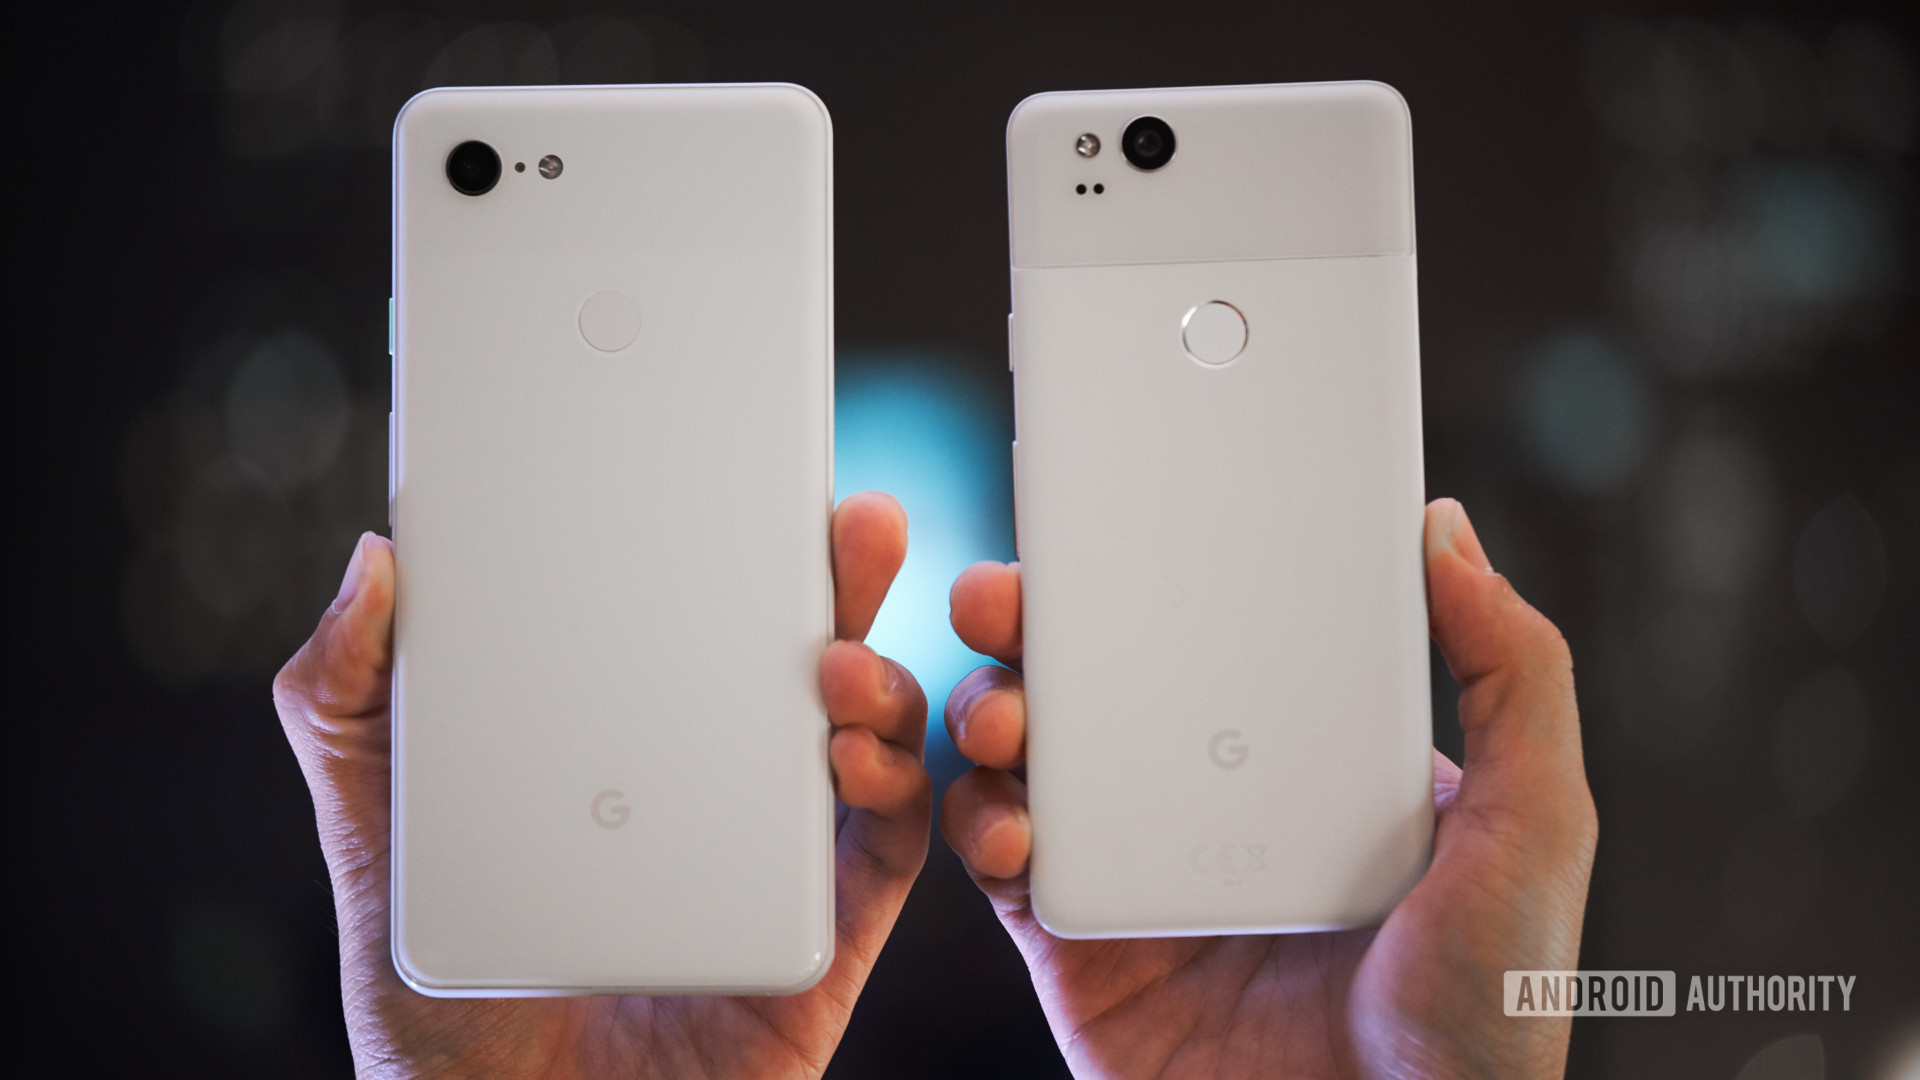 Pixel 3 XL and pixel 3 side to side back end